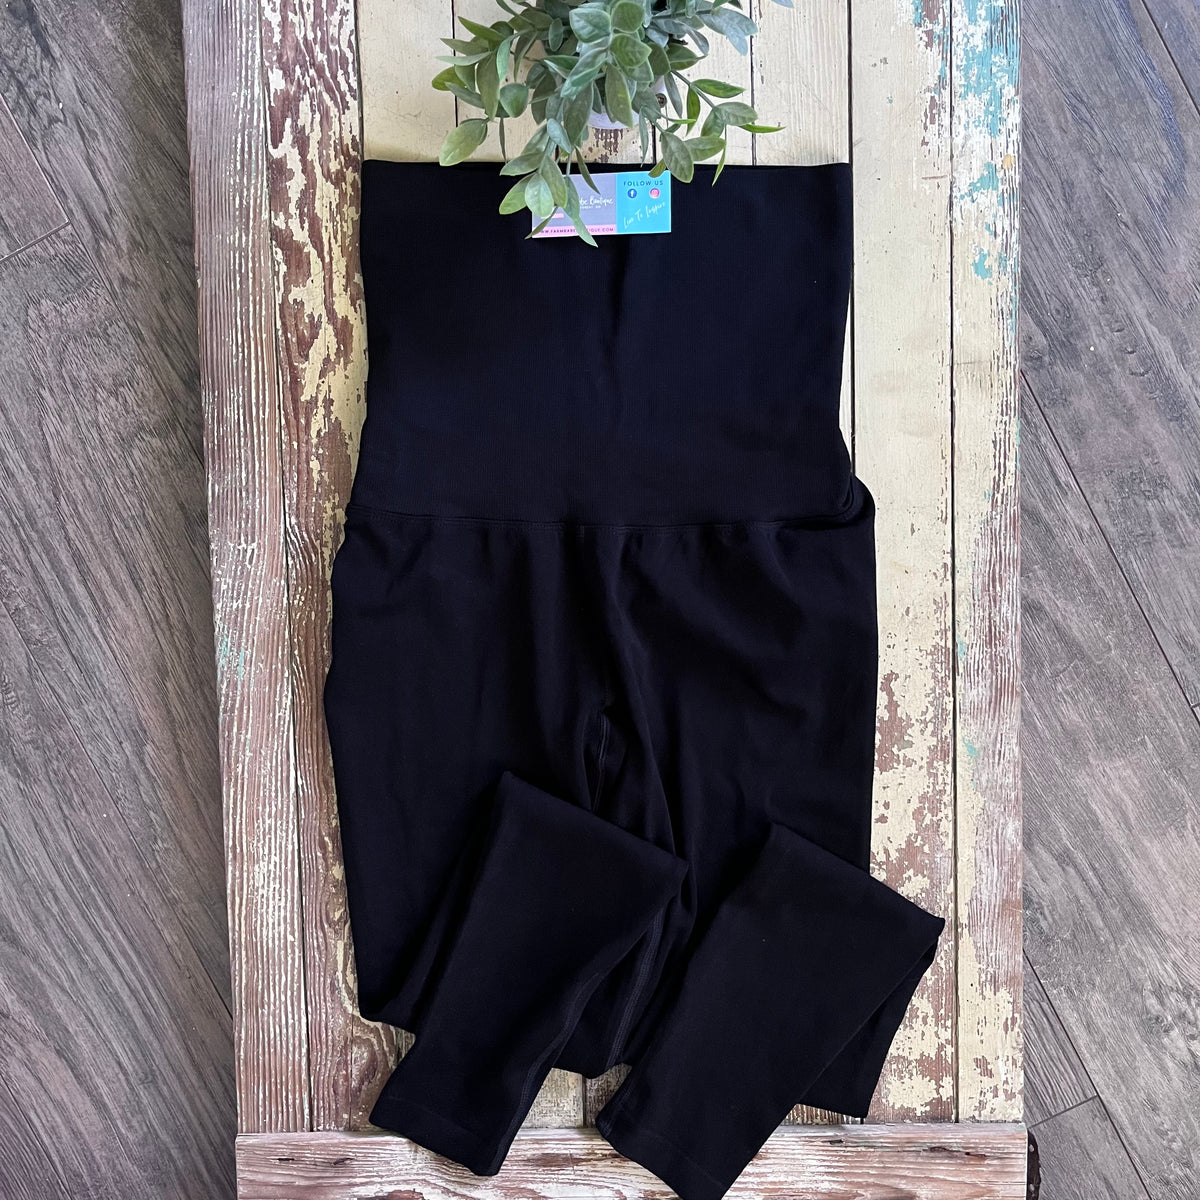 Perfect Fit Leggings by Grace & Lace - Black – Specialty Design Company